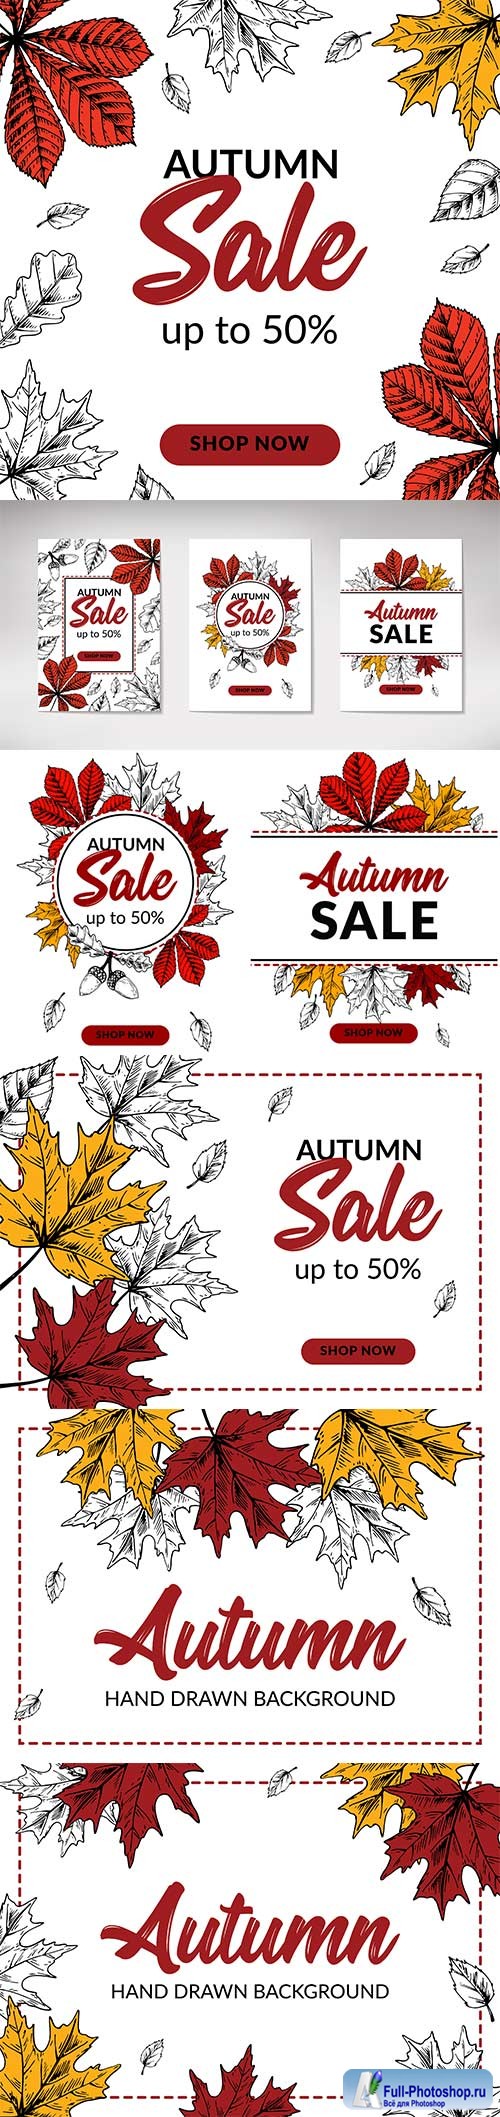 Hand drawn autumn sale banner with colorful maple leaves